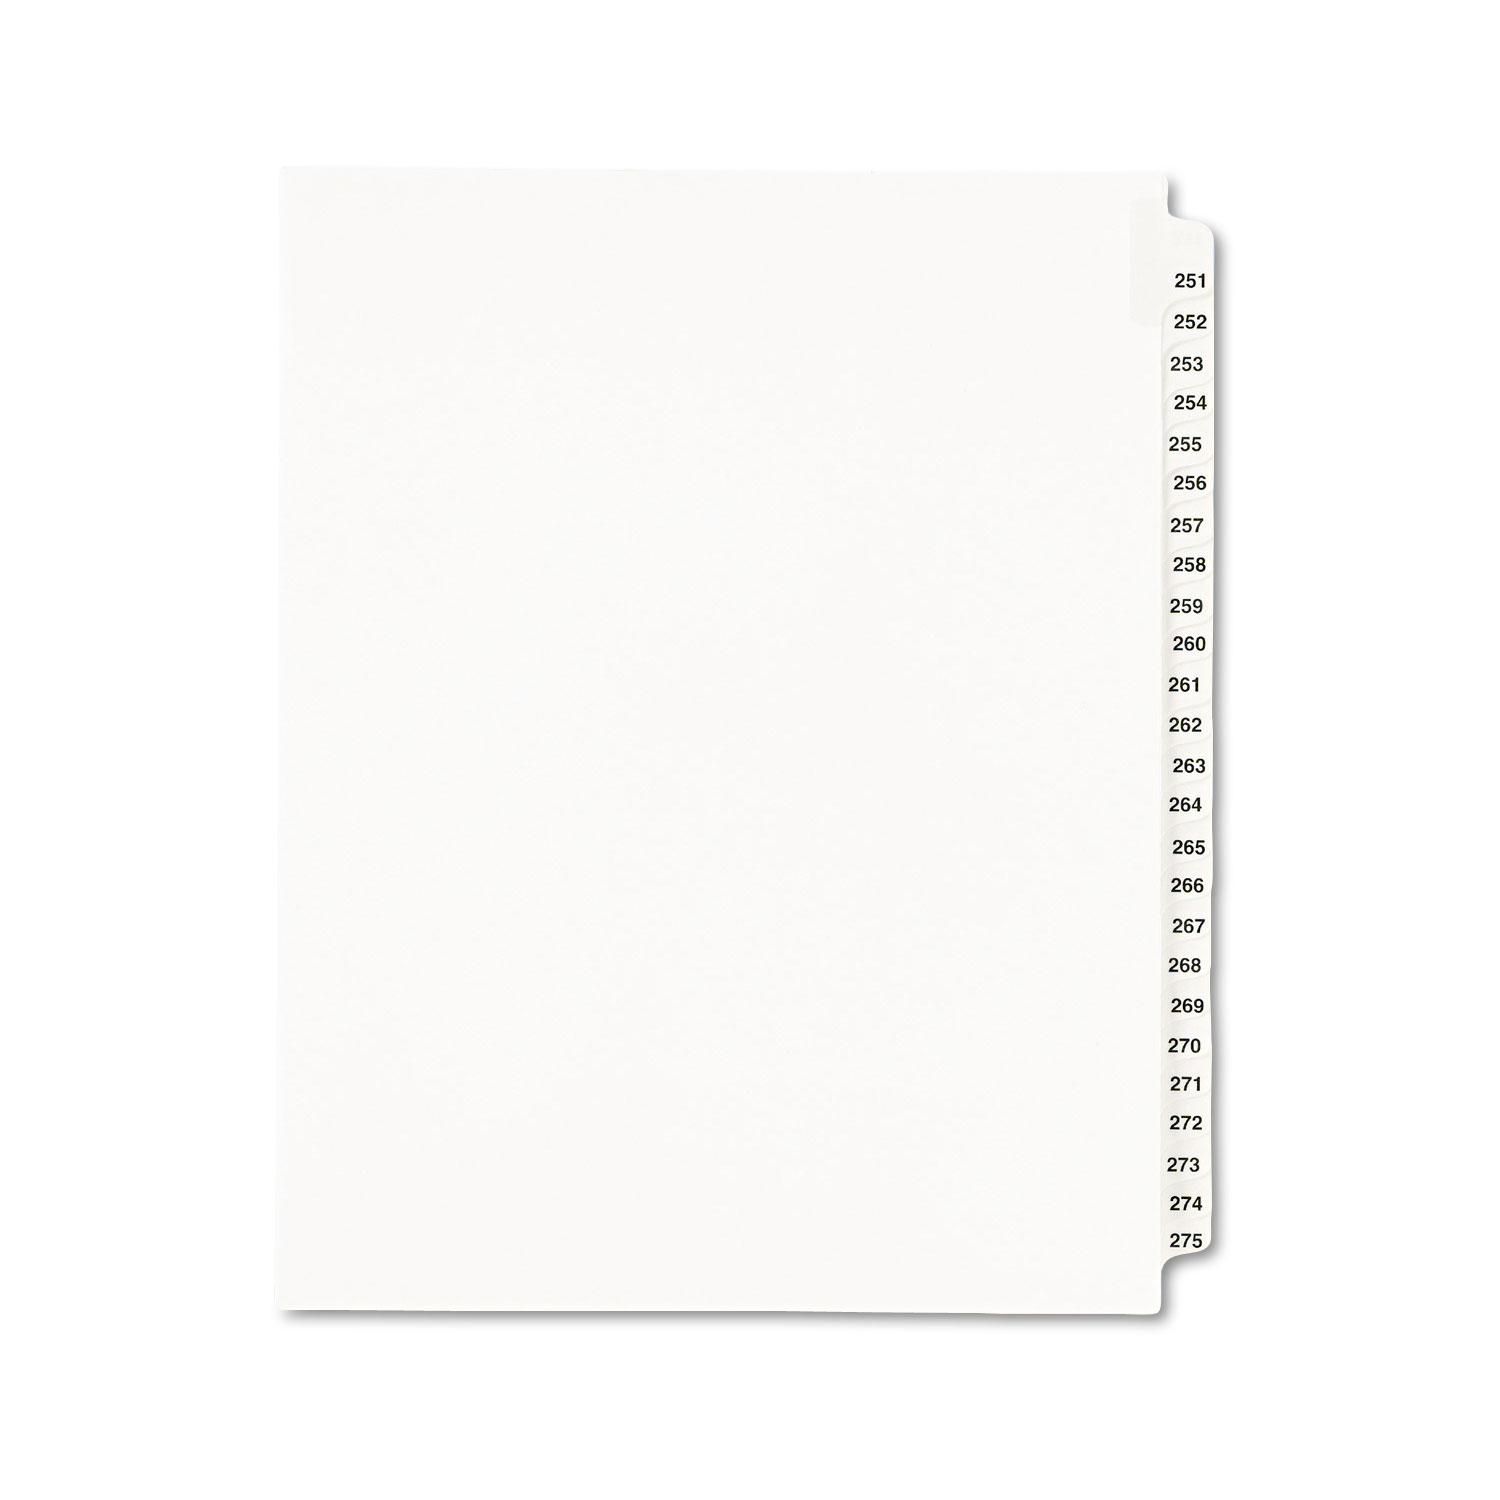  Avery 01340 Preprinted Legal Exhibit Side Tab Index Dividers, Avery Style, 25-Tab, 251 to 275, 11 x 8.5, White, 1 Set (AVE01340) 